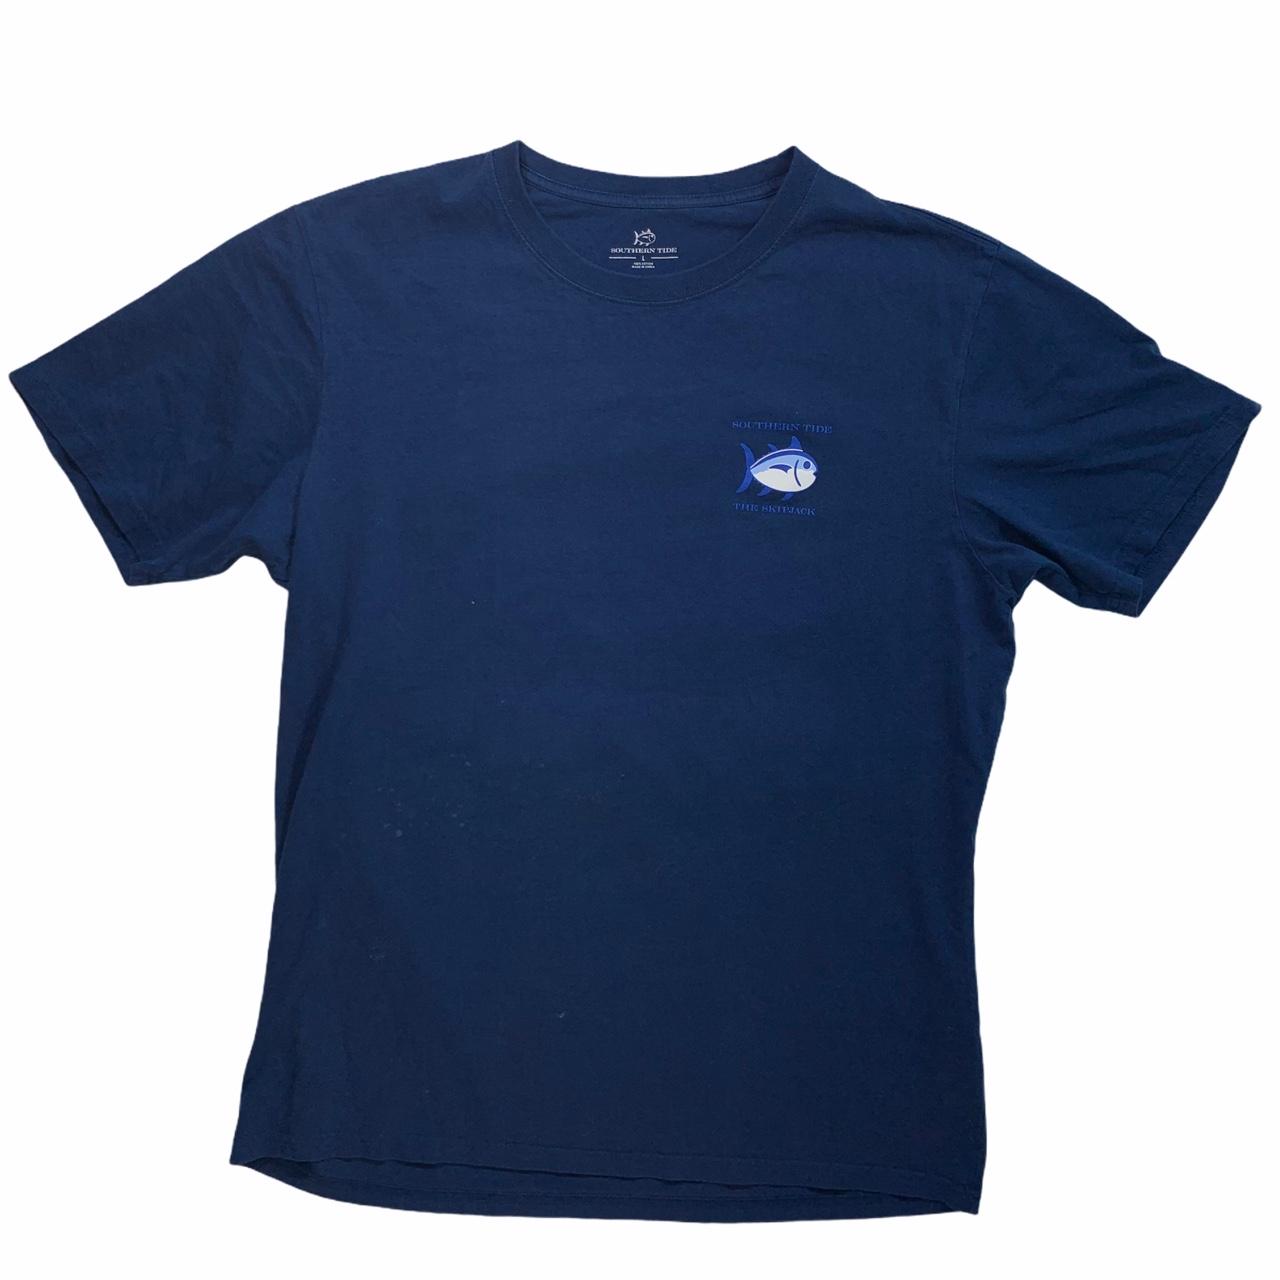 Product Image 1 - •Southern Tide The Skipjack T-Shirt

-Size: